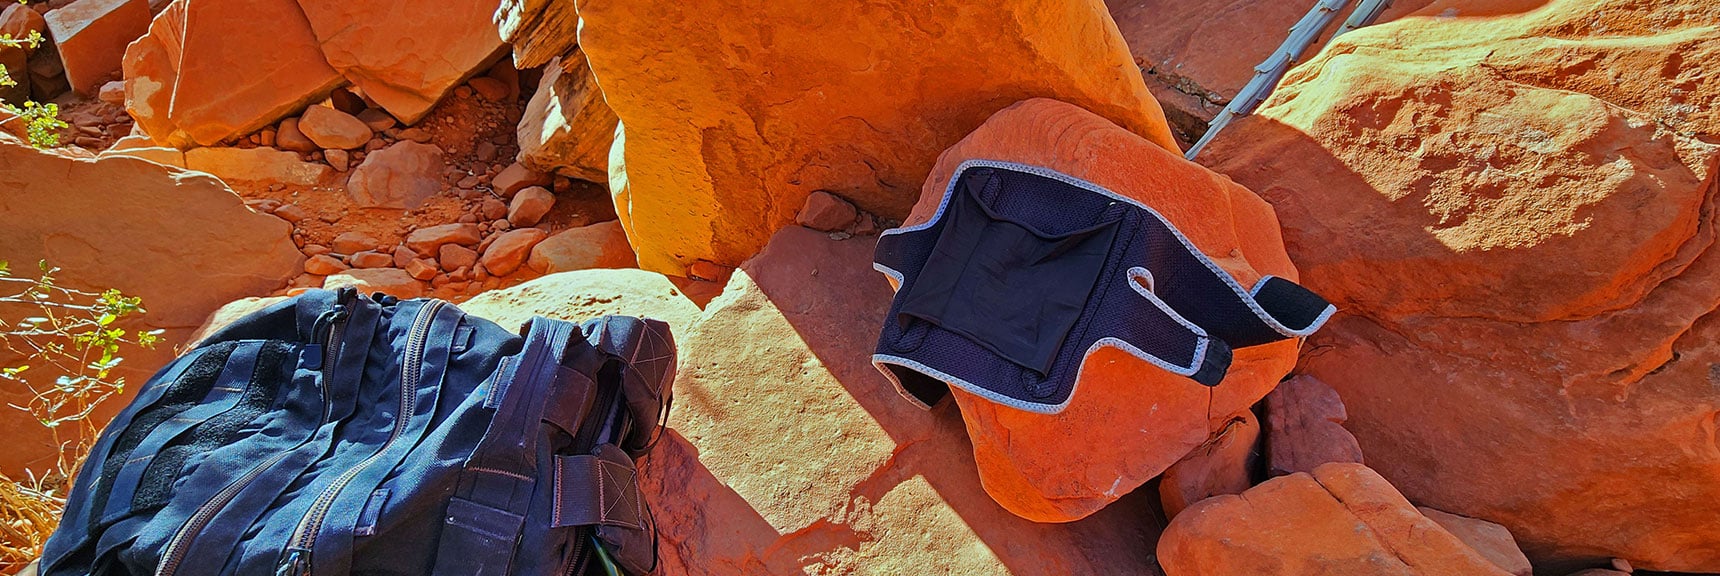 Knee Braces Providing Padding, Stability and Shock Absorption While Traversing Boulders. | Lower Calico Hills Loop | Calico Basin & Red Rock Canyon, Nevada